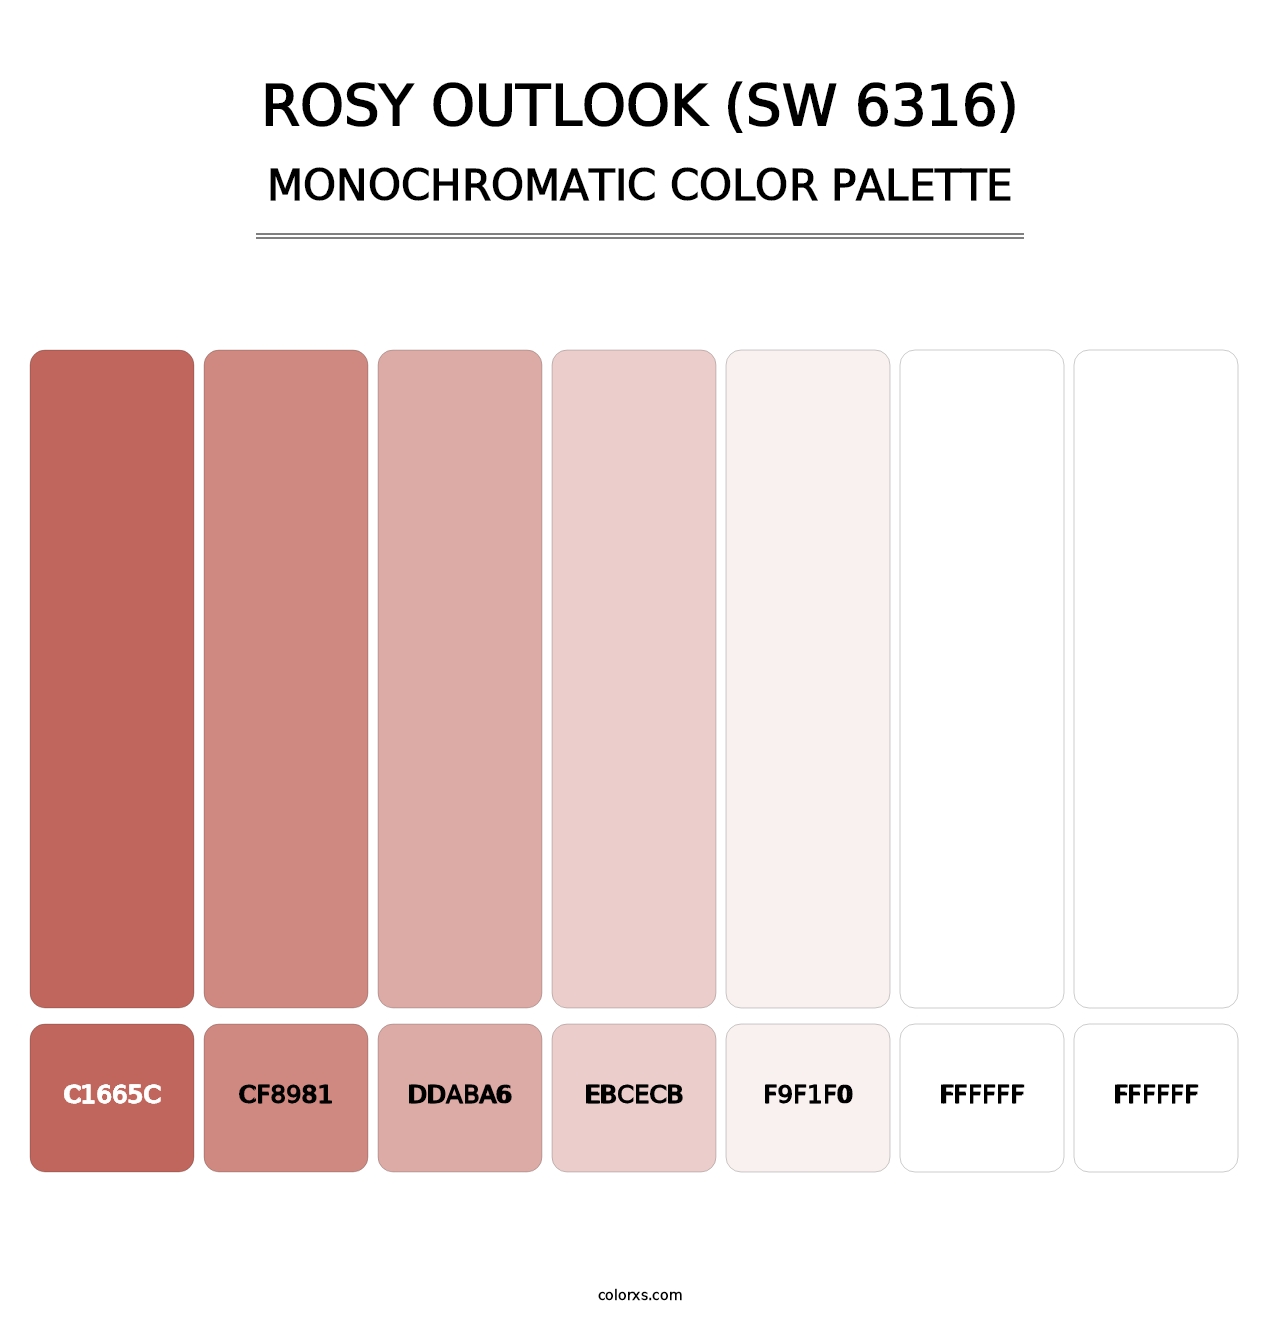 Rosy Outlook (SW 6316) - Monochromatic Color Palette